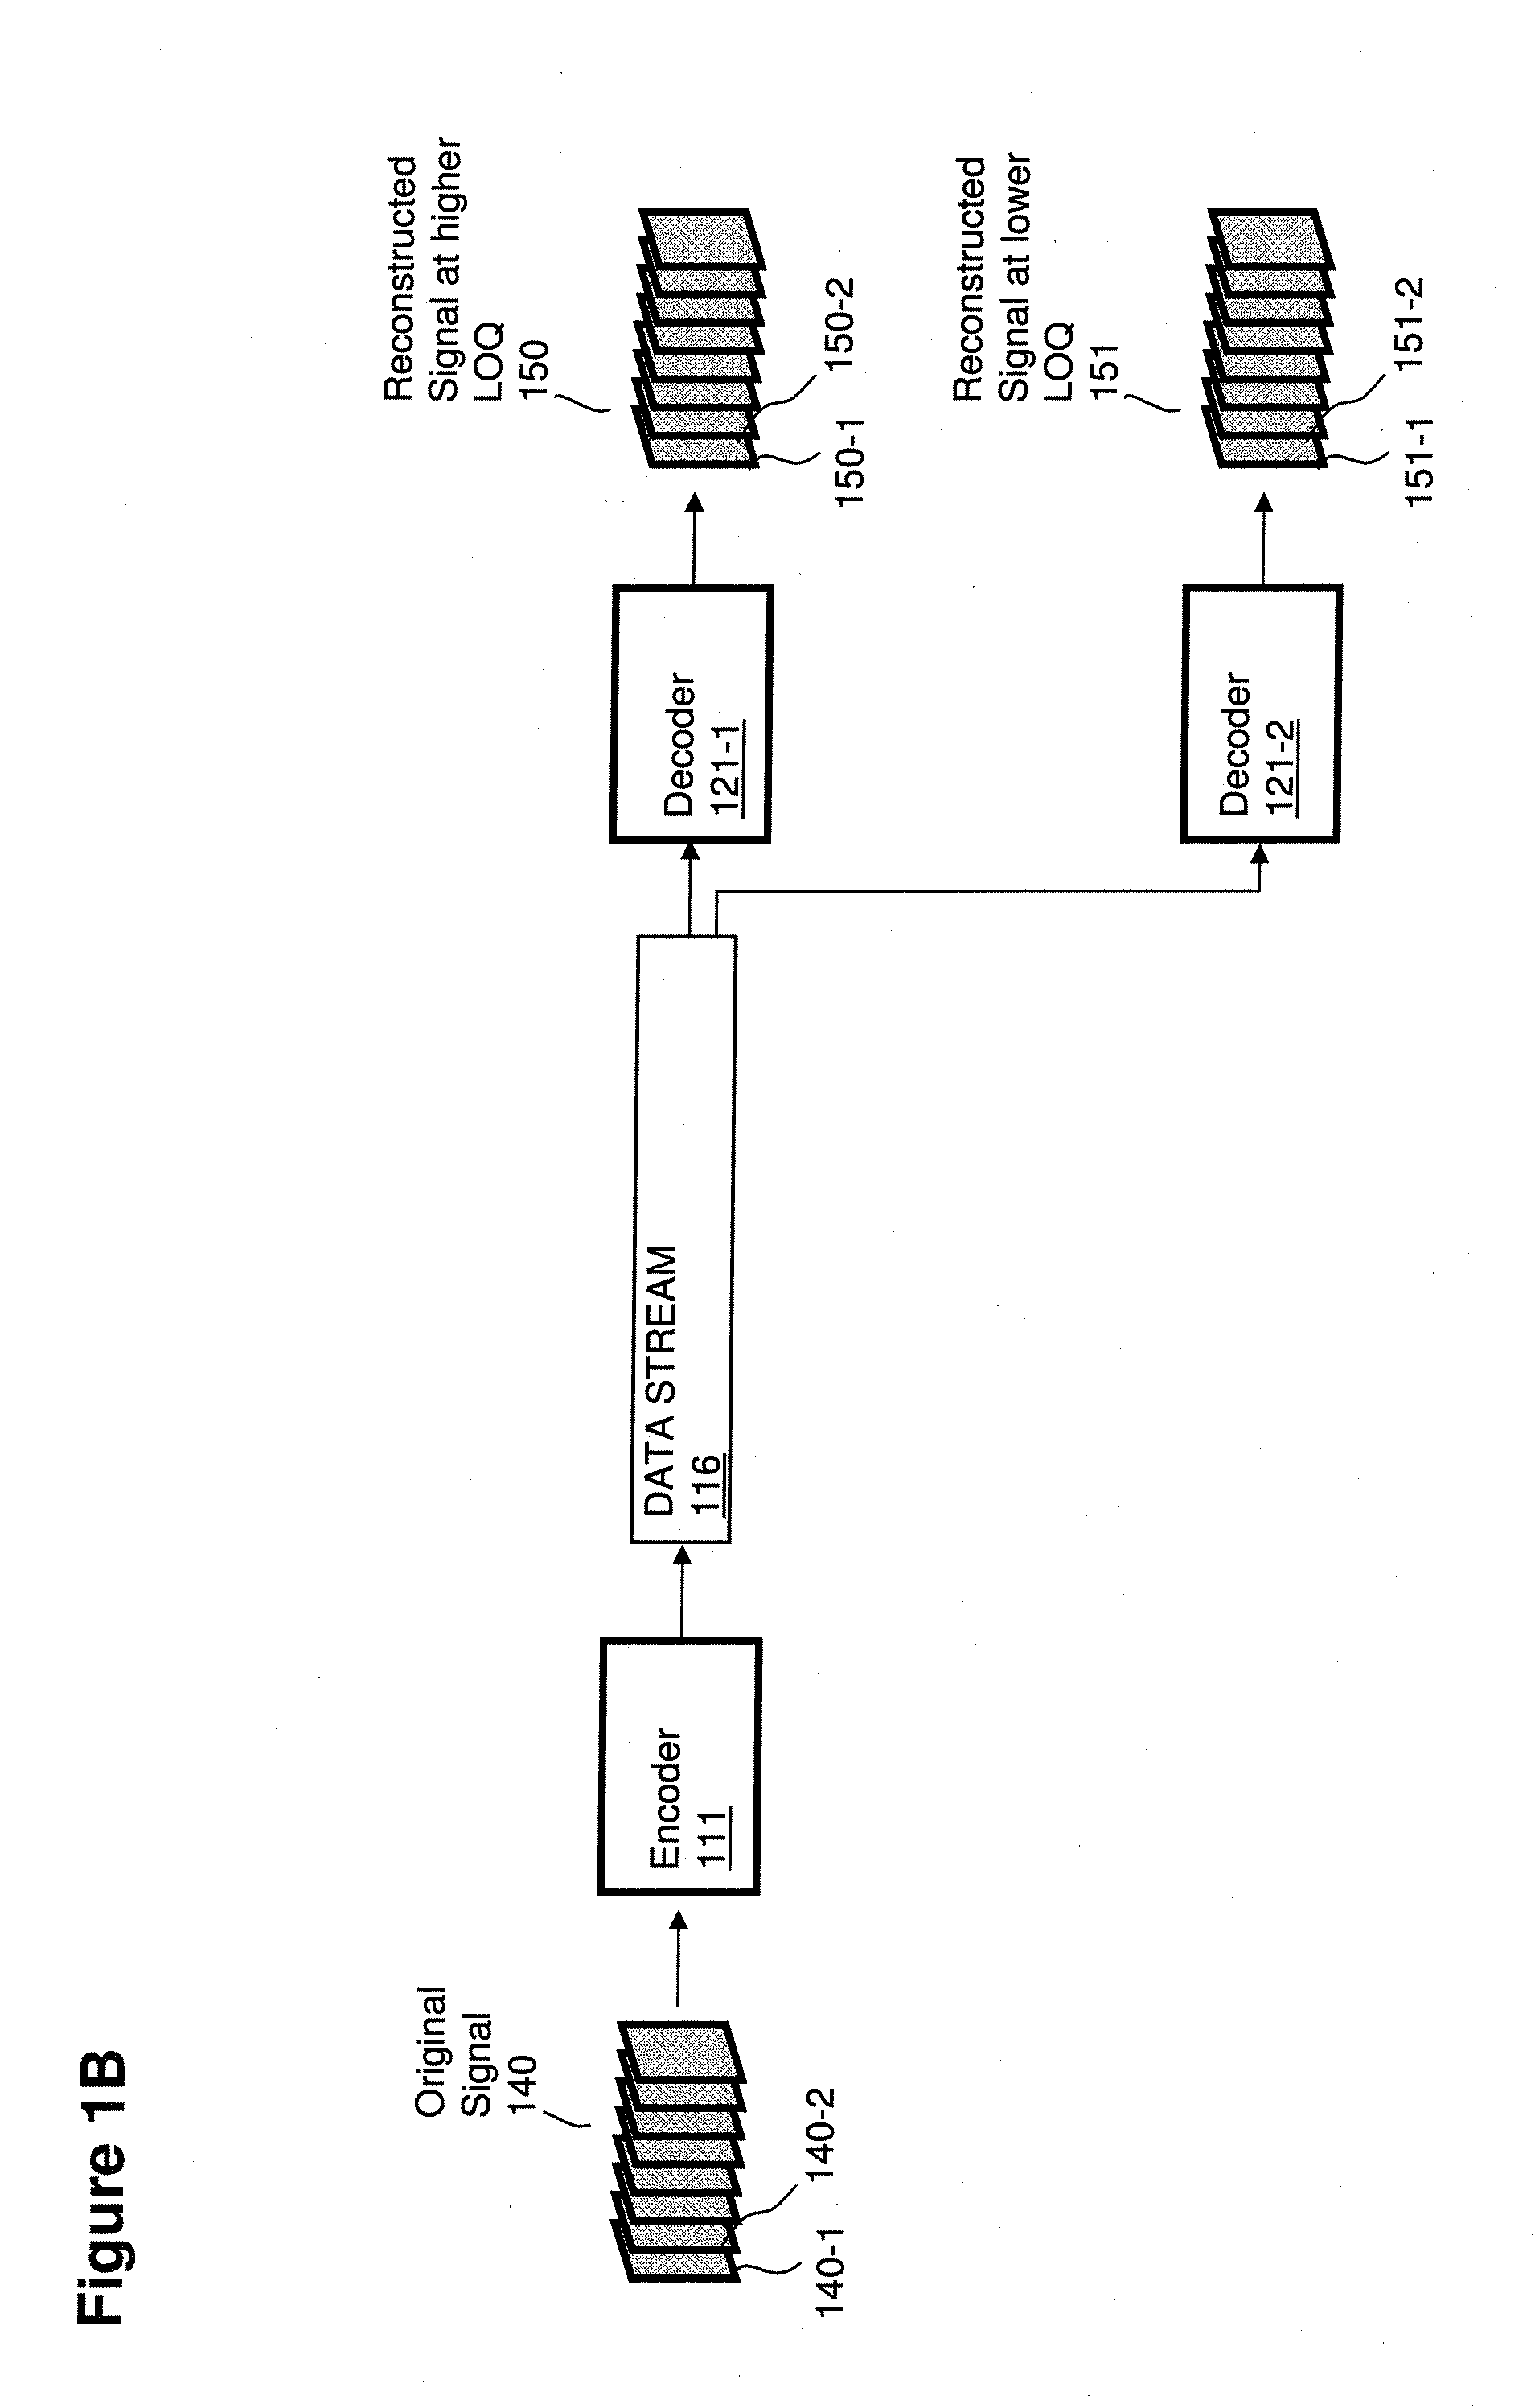 Decomposition of residual data during signal encoding, decoding and reconstruction in a tiered hierarchy